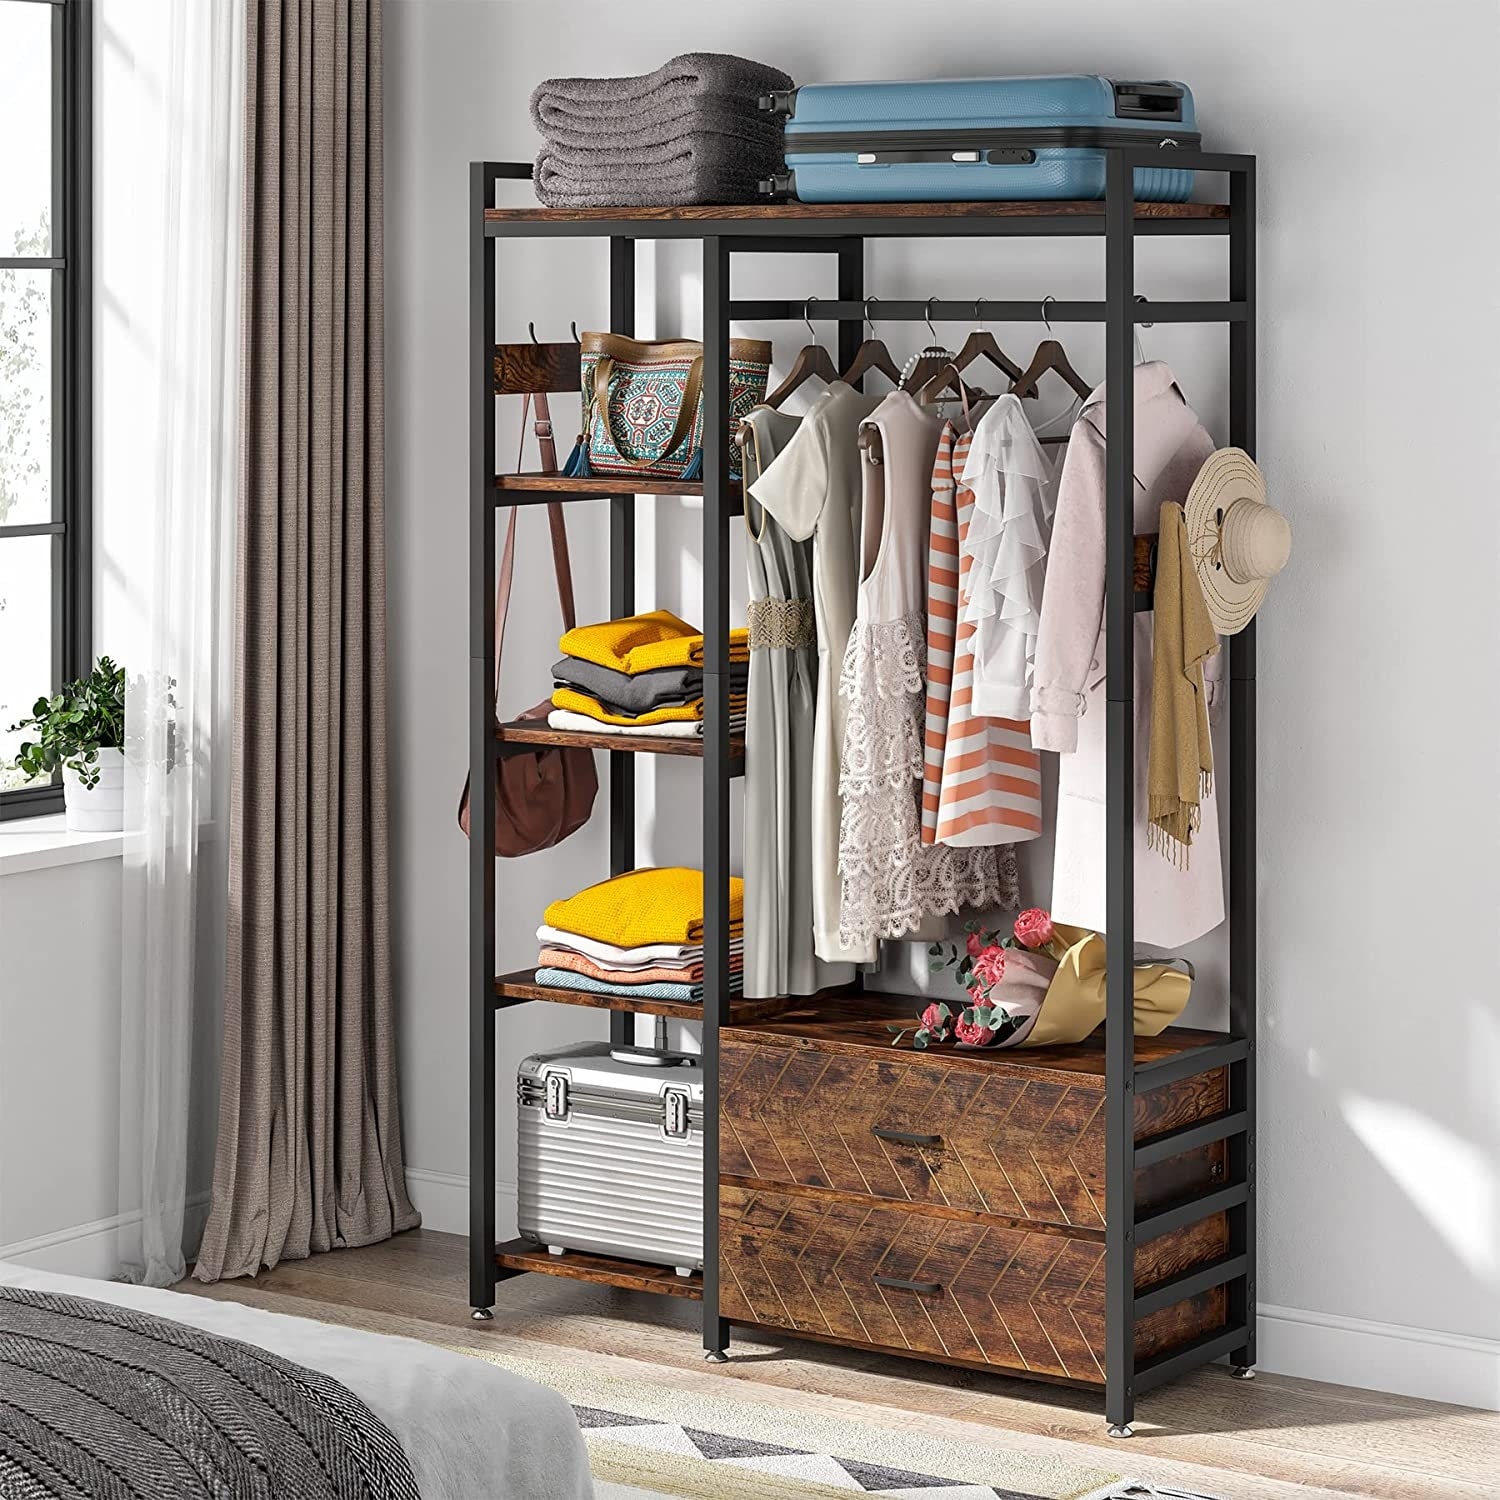 https://ak1.ostkcdn.com/images/products/is/images/direct/0e94666ca61e6d6c3e606b019c986e29f0b2b058/Freestanding-Closet-Organizer%2C-Clothes-Rack-with-Drawers%2C-Garment-Rack-Hanging-Clothing-Wardrobe-Storage-Closet-for-Bedroom.jpg